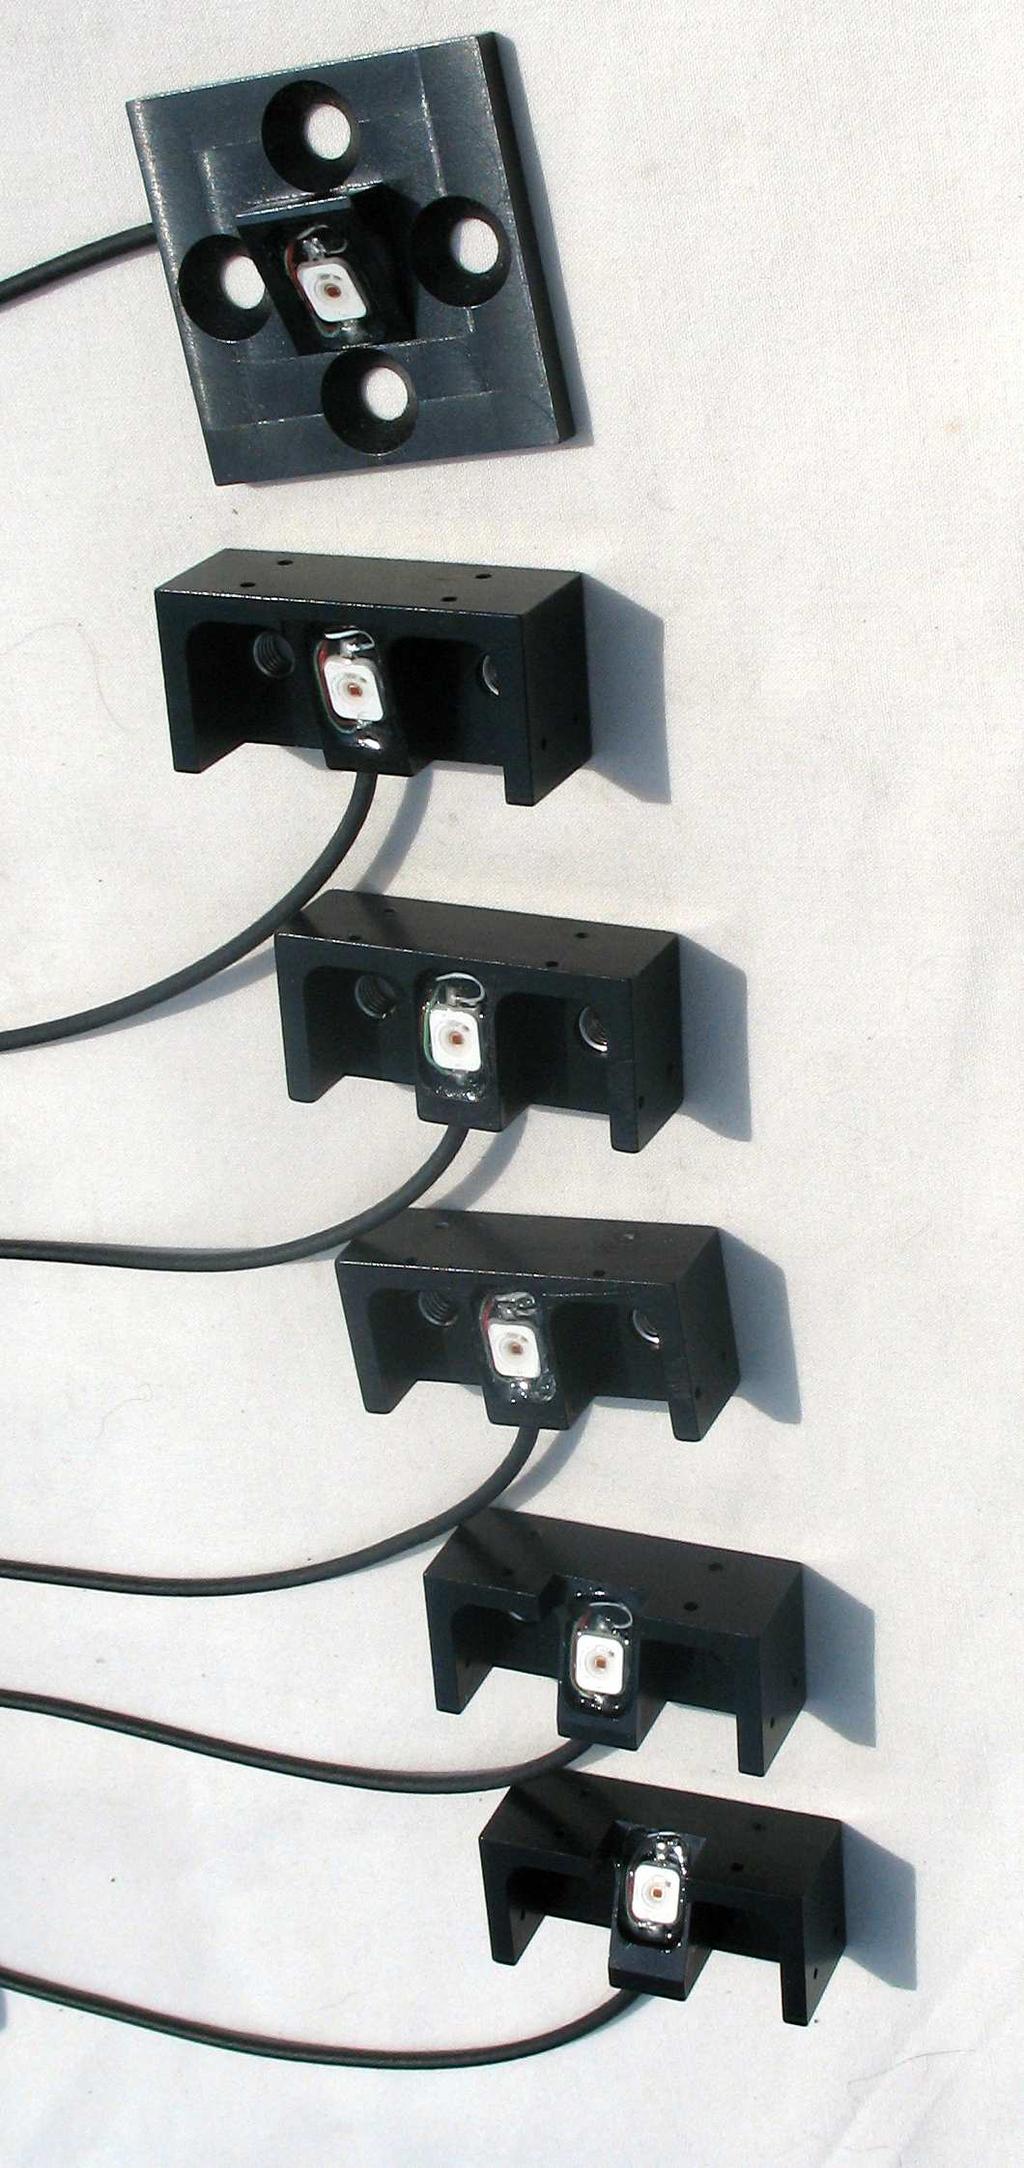 Figure 3. RibEye interface (trunk) box Figure 2. RibEye LEDs The RibEye components are interconnected as shown in Figure 4.